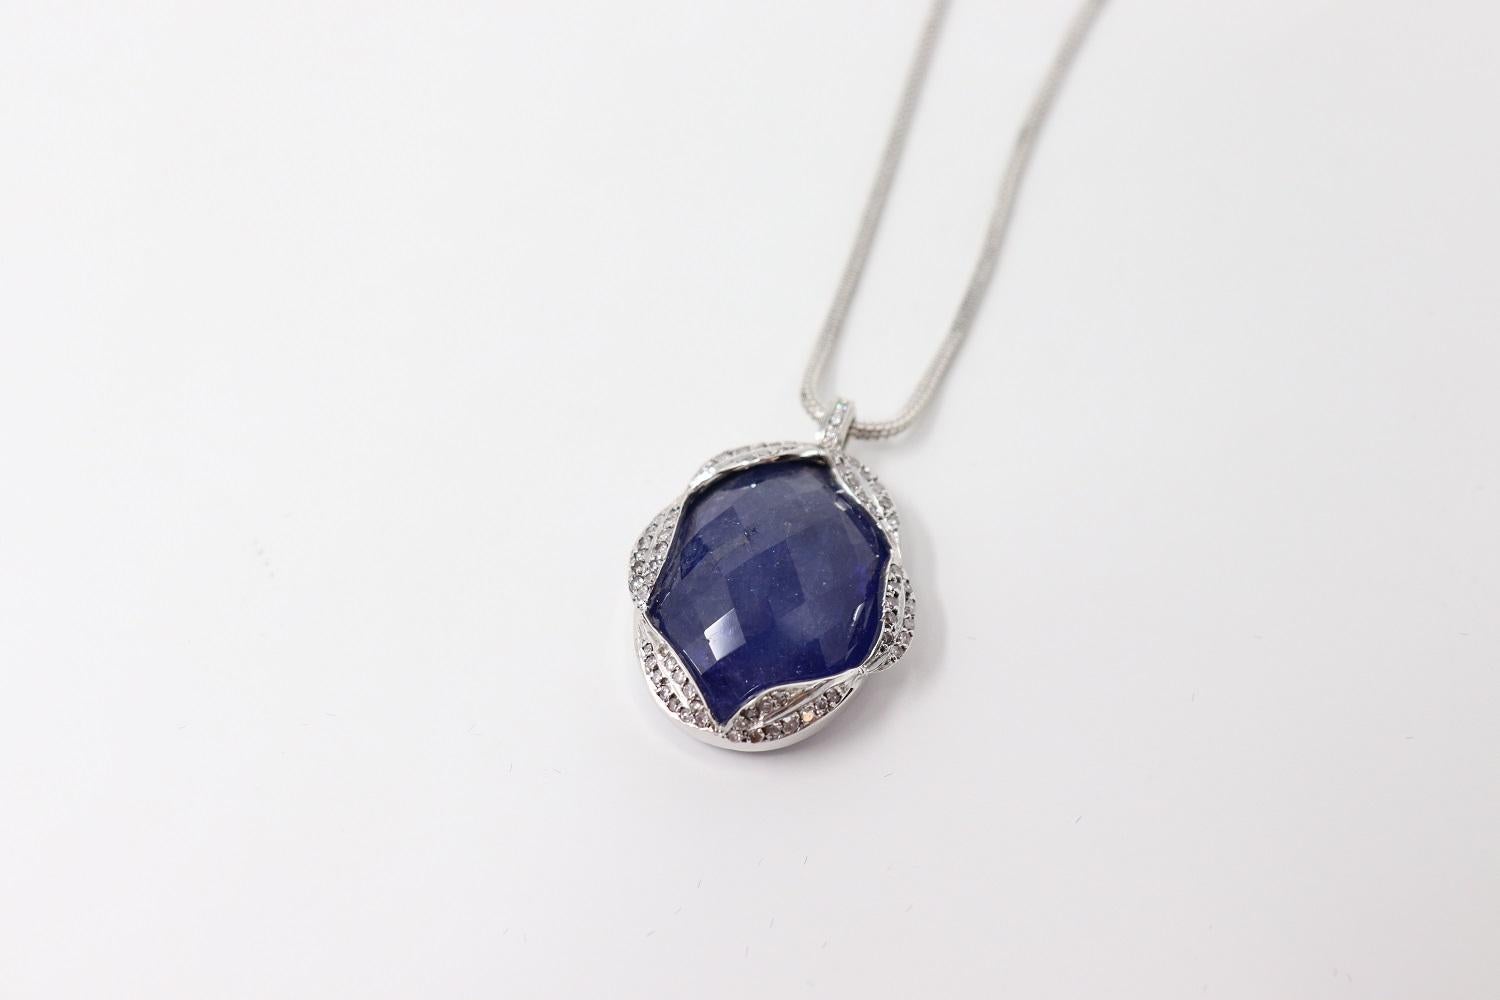 Beautiful and rare necklace in 18kt white gold with a large 65 ct Tanzanite pendant. The pendant is surrounded by brilliant cut diamonds. Total weight 16 gr.